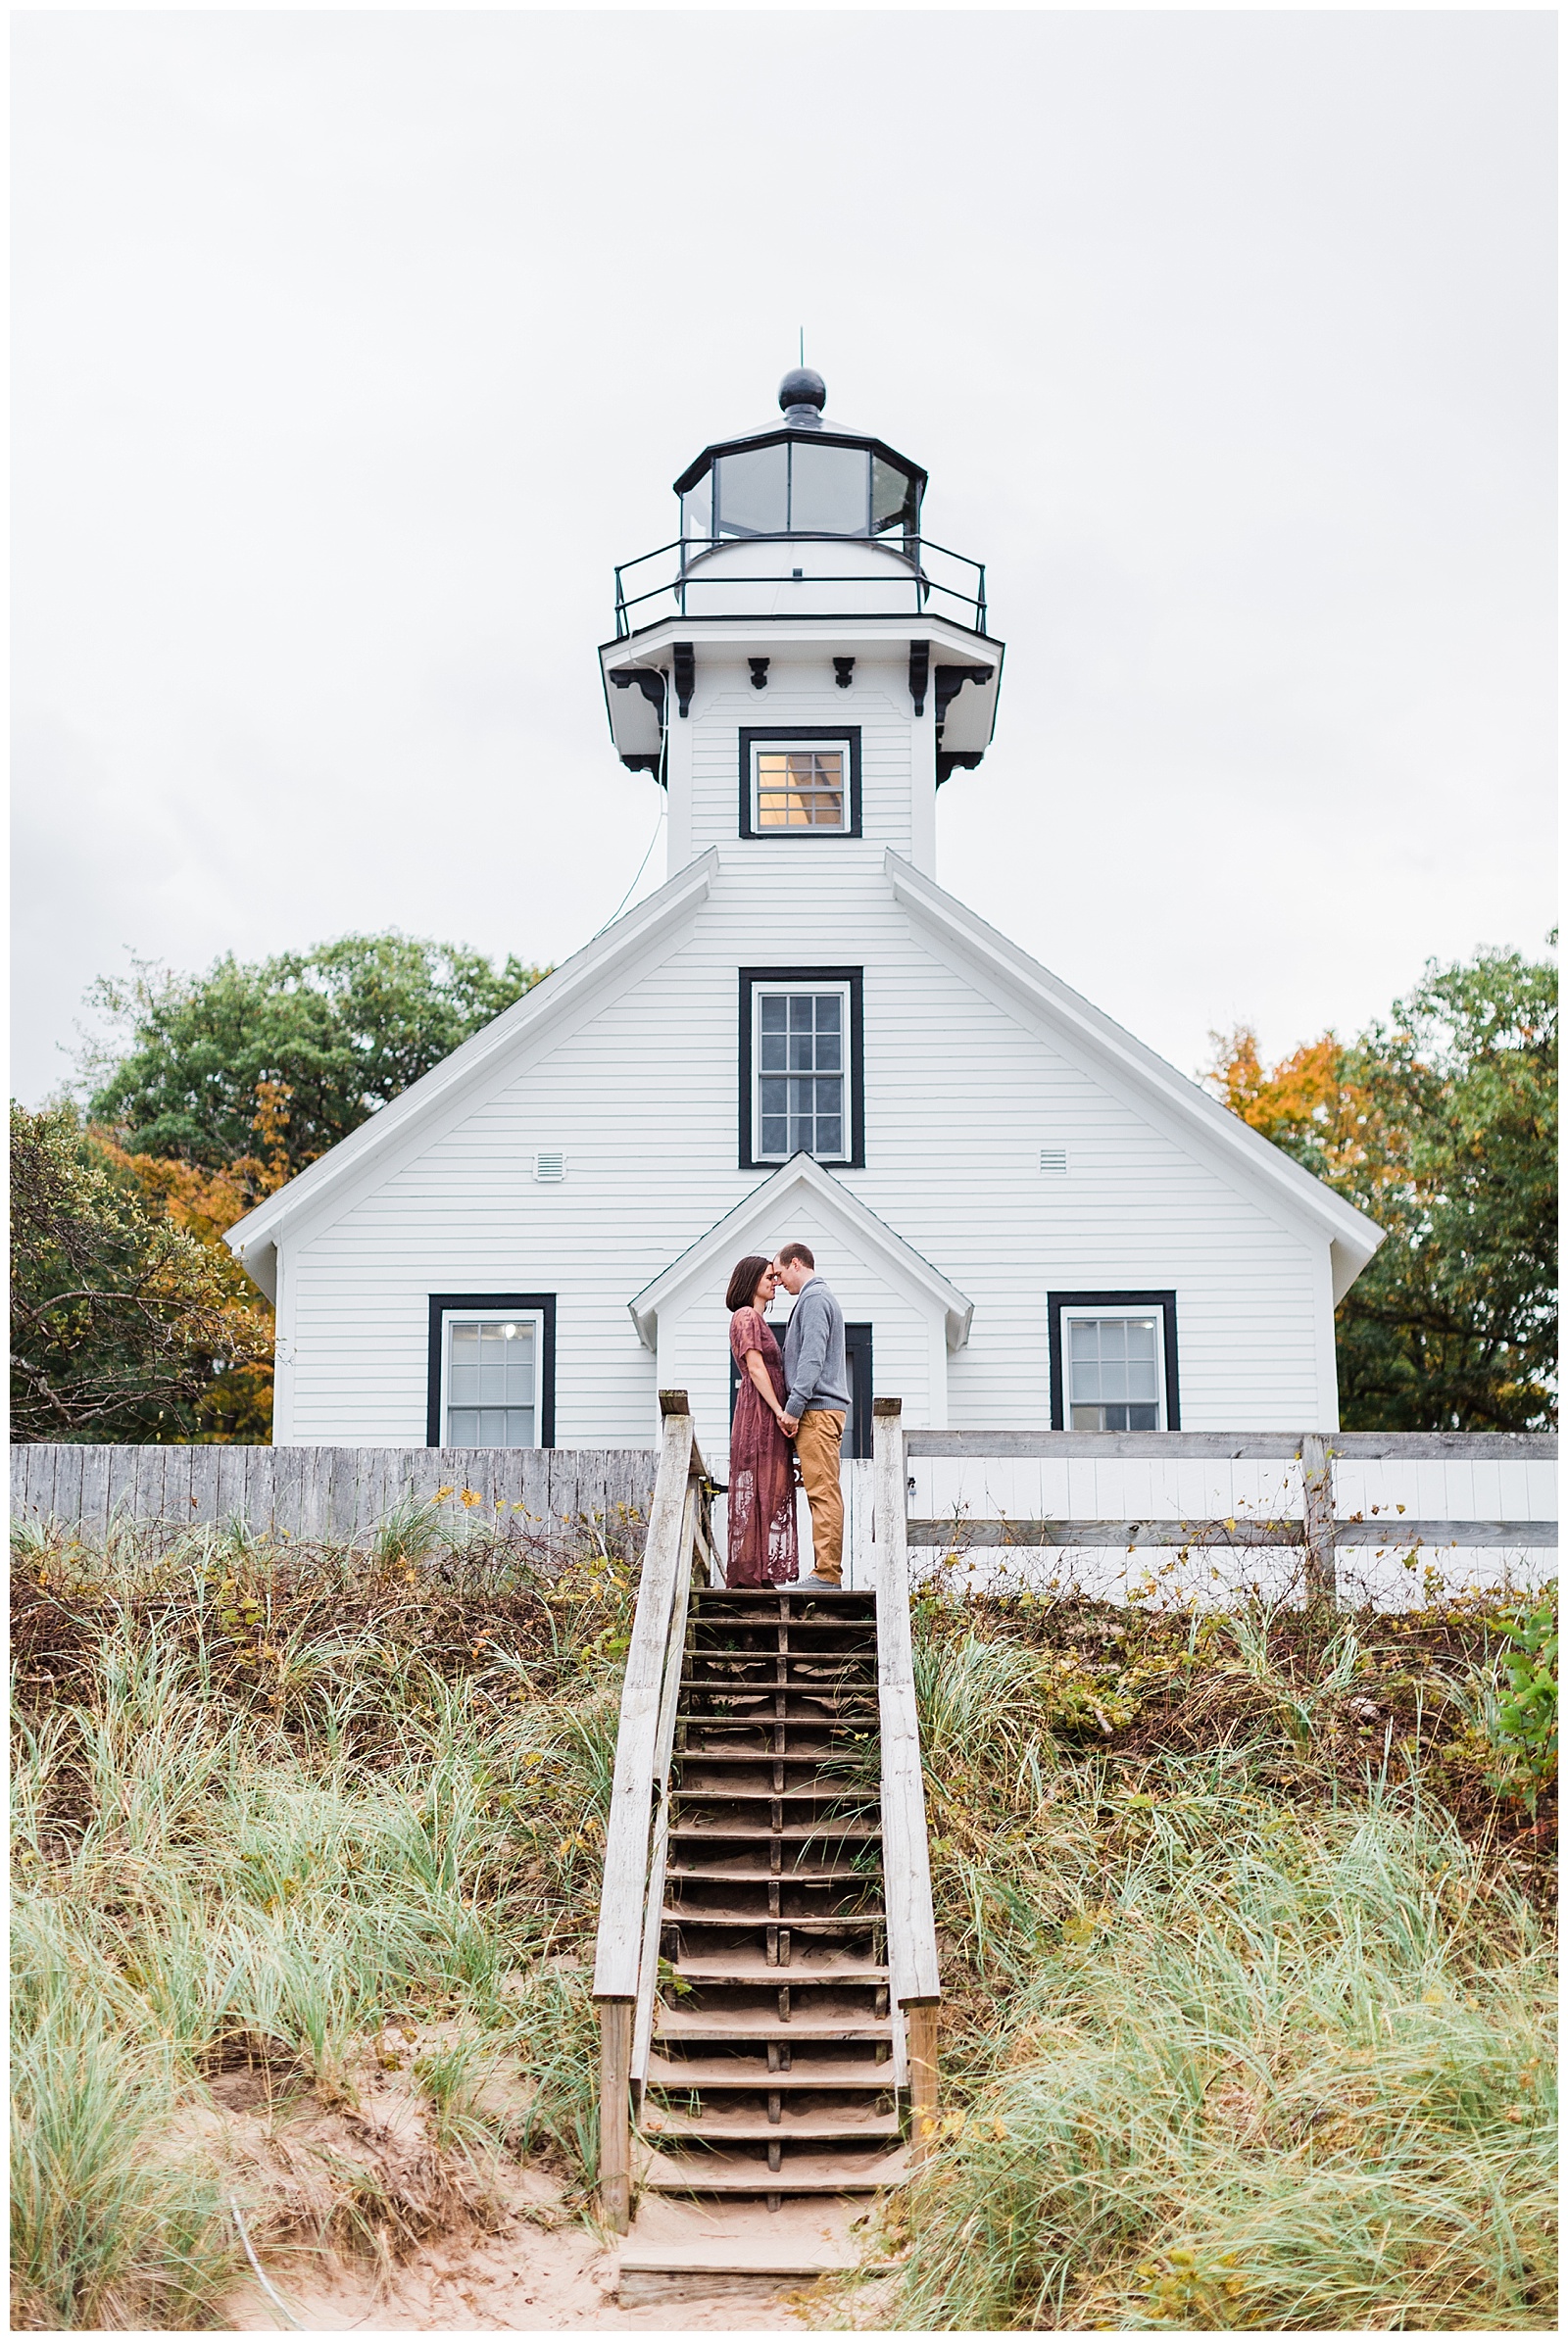 Traverse City engagement photography at the Old Peninsula lighthouse.